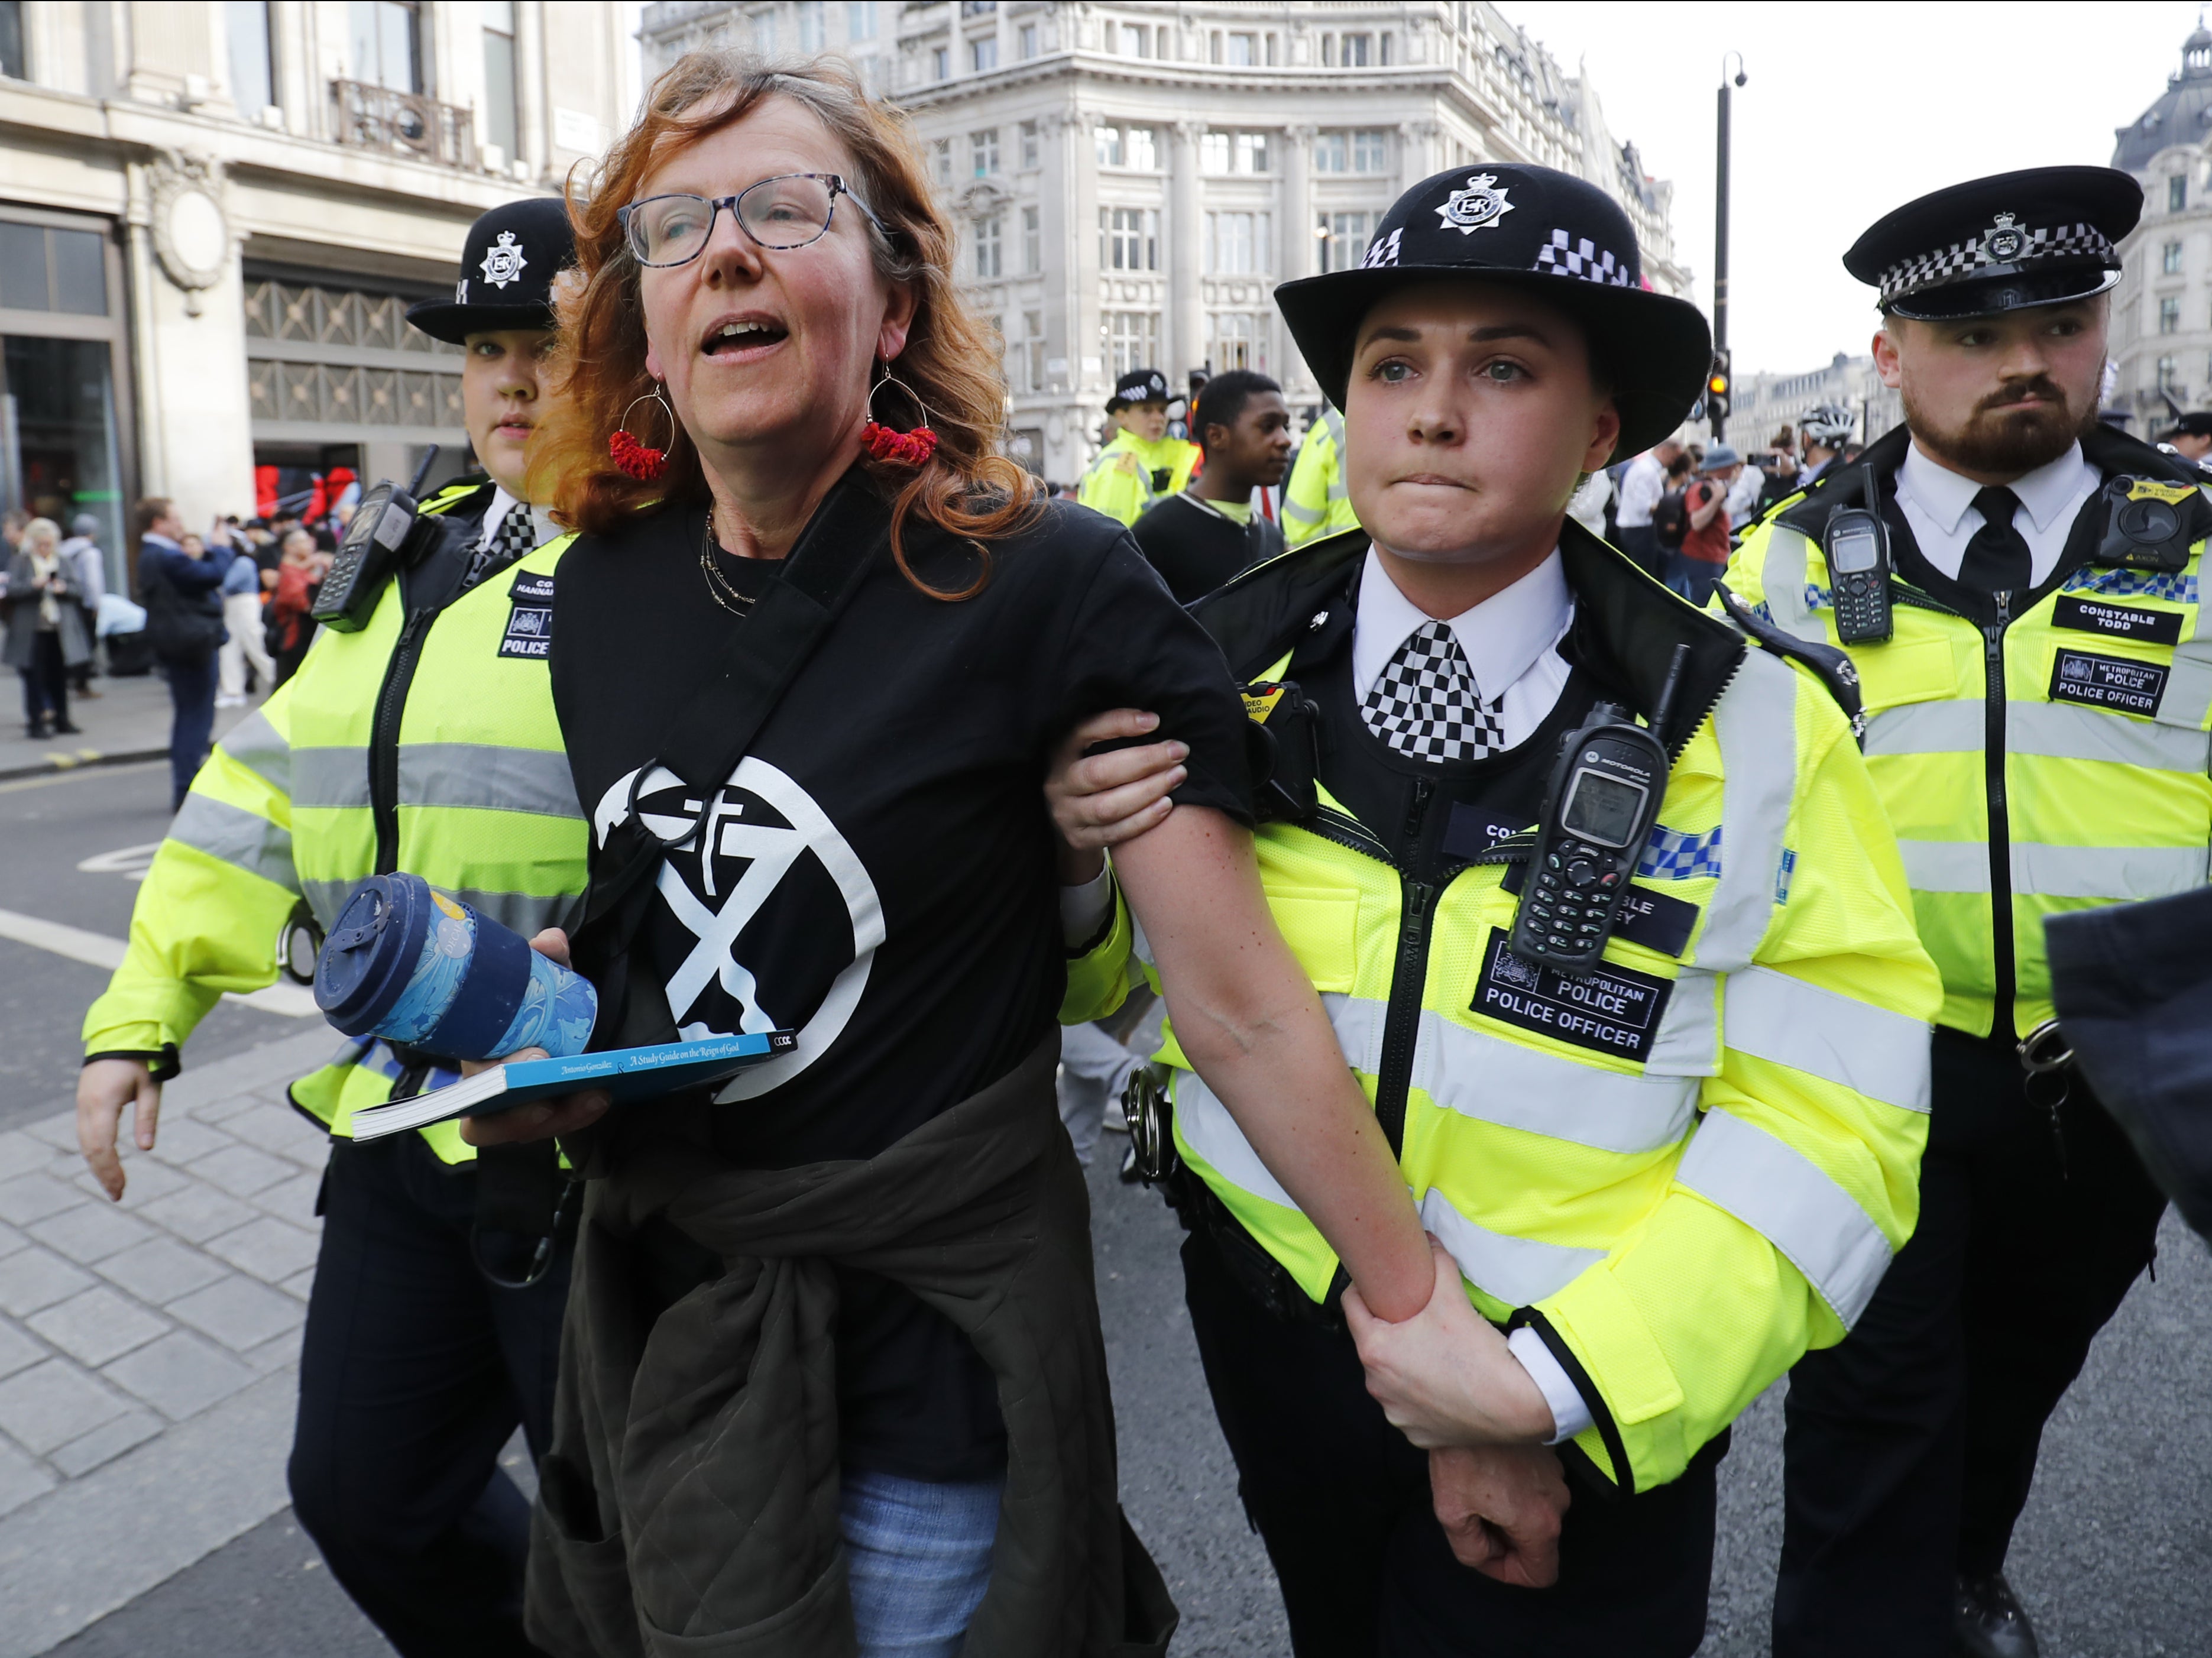 Police officers escorting a climate activist during protests in April 2019